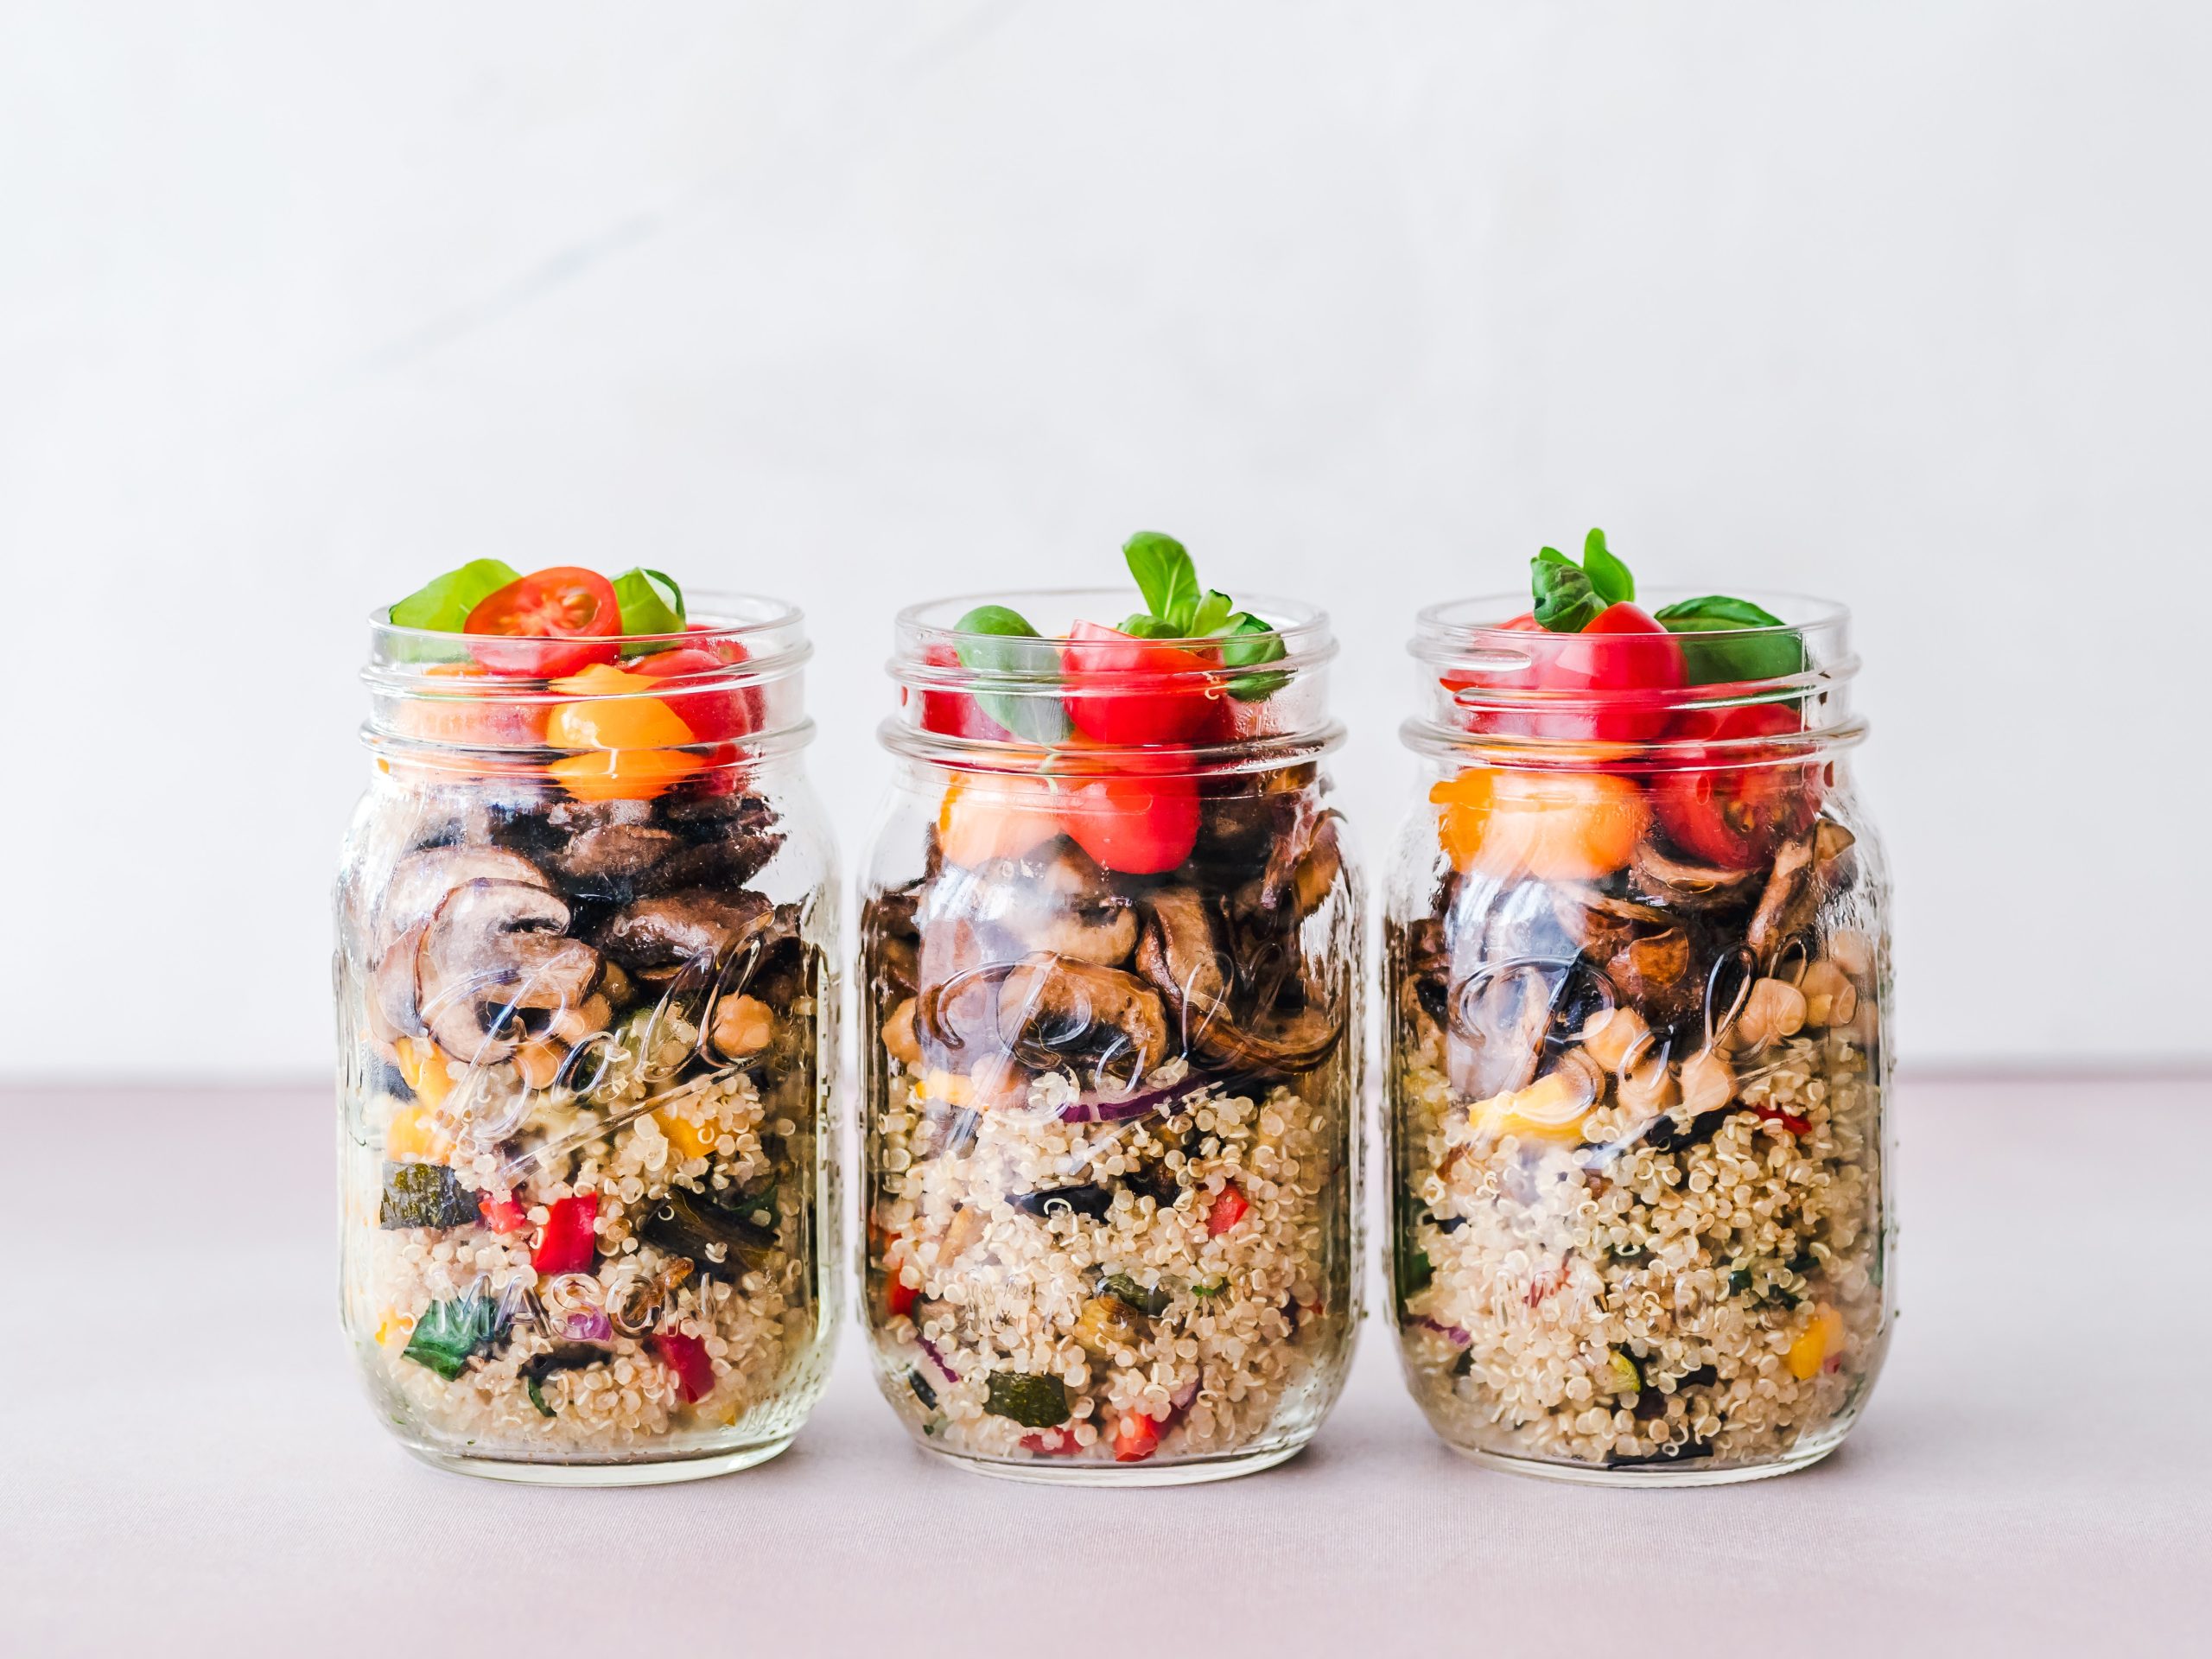 A variety of colorful meal prep containers filled with neatly arranged, portioned meals. Fresh ingredients and vibrant colors signify healthy and convenient meal prepping made easy